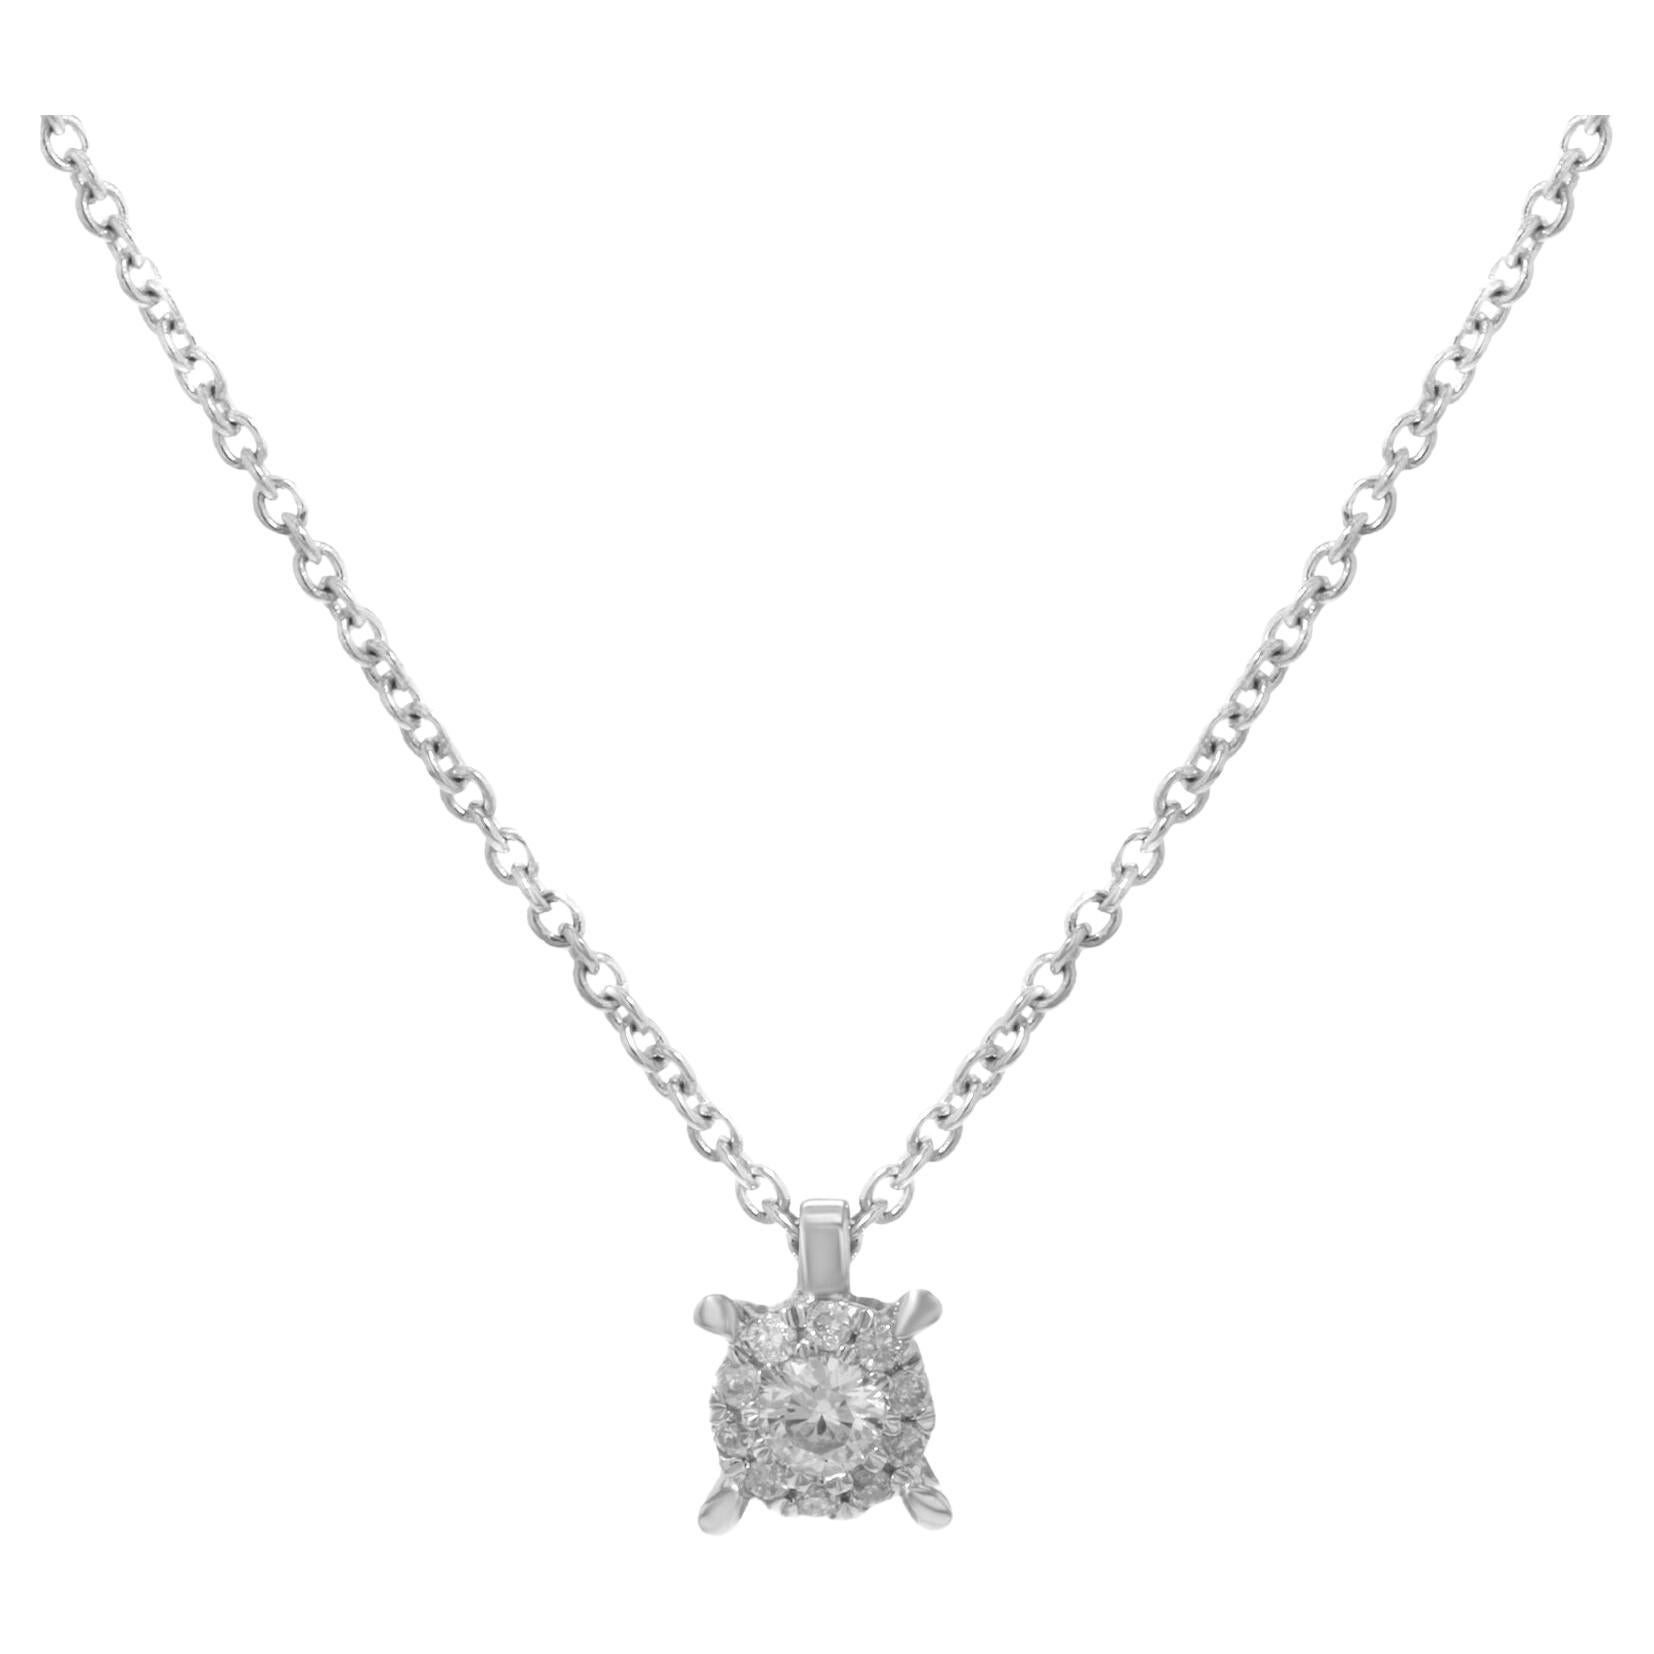 0.10Cttw Bliss by Damiani Cluster Diamond Pendant Necklace 18K White Gold